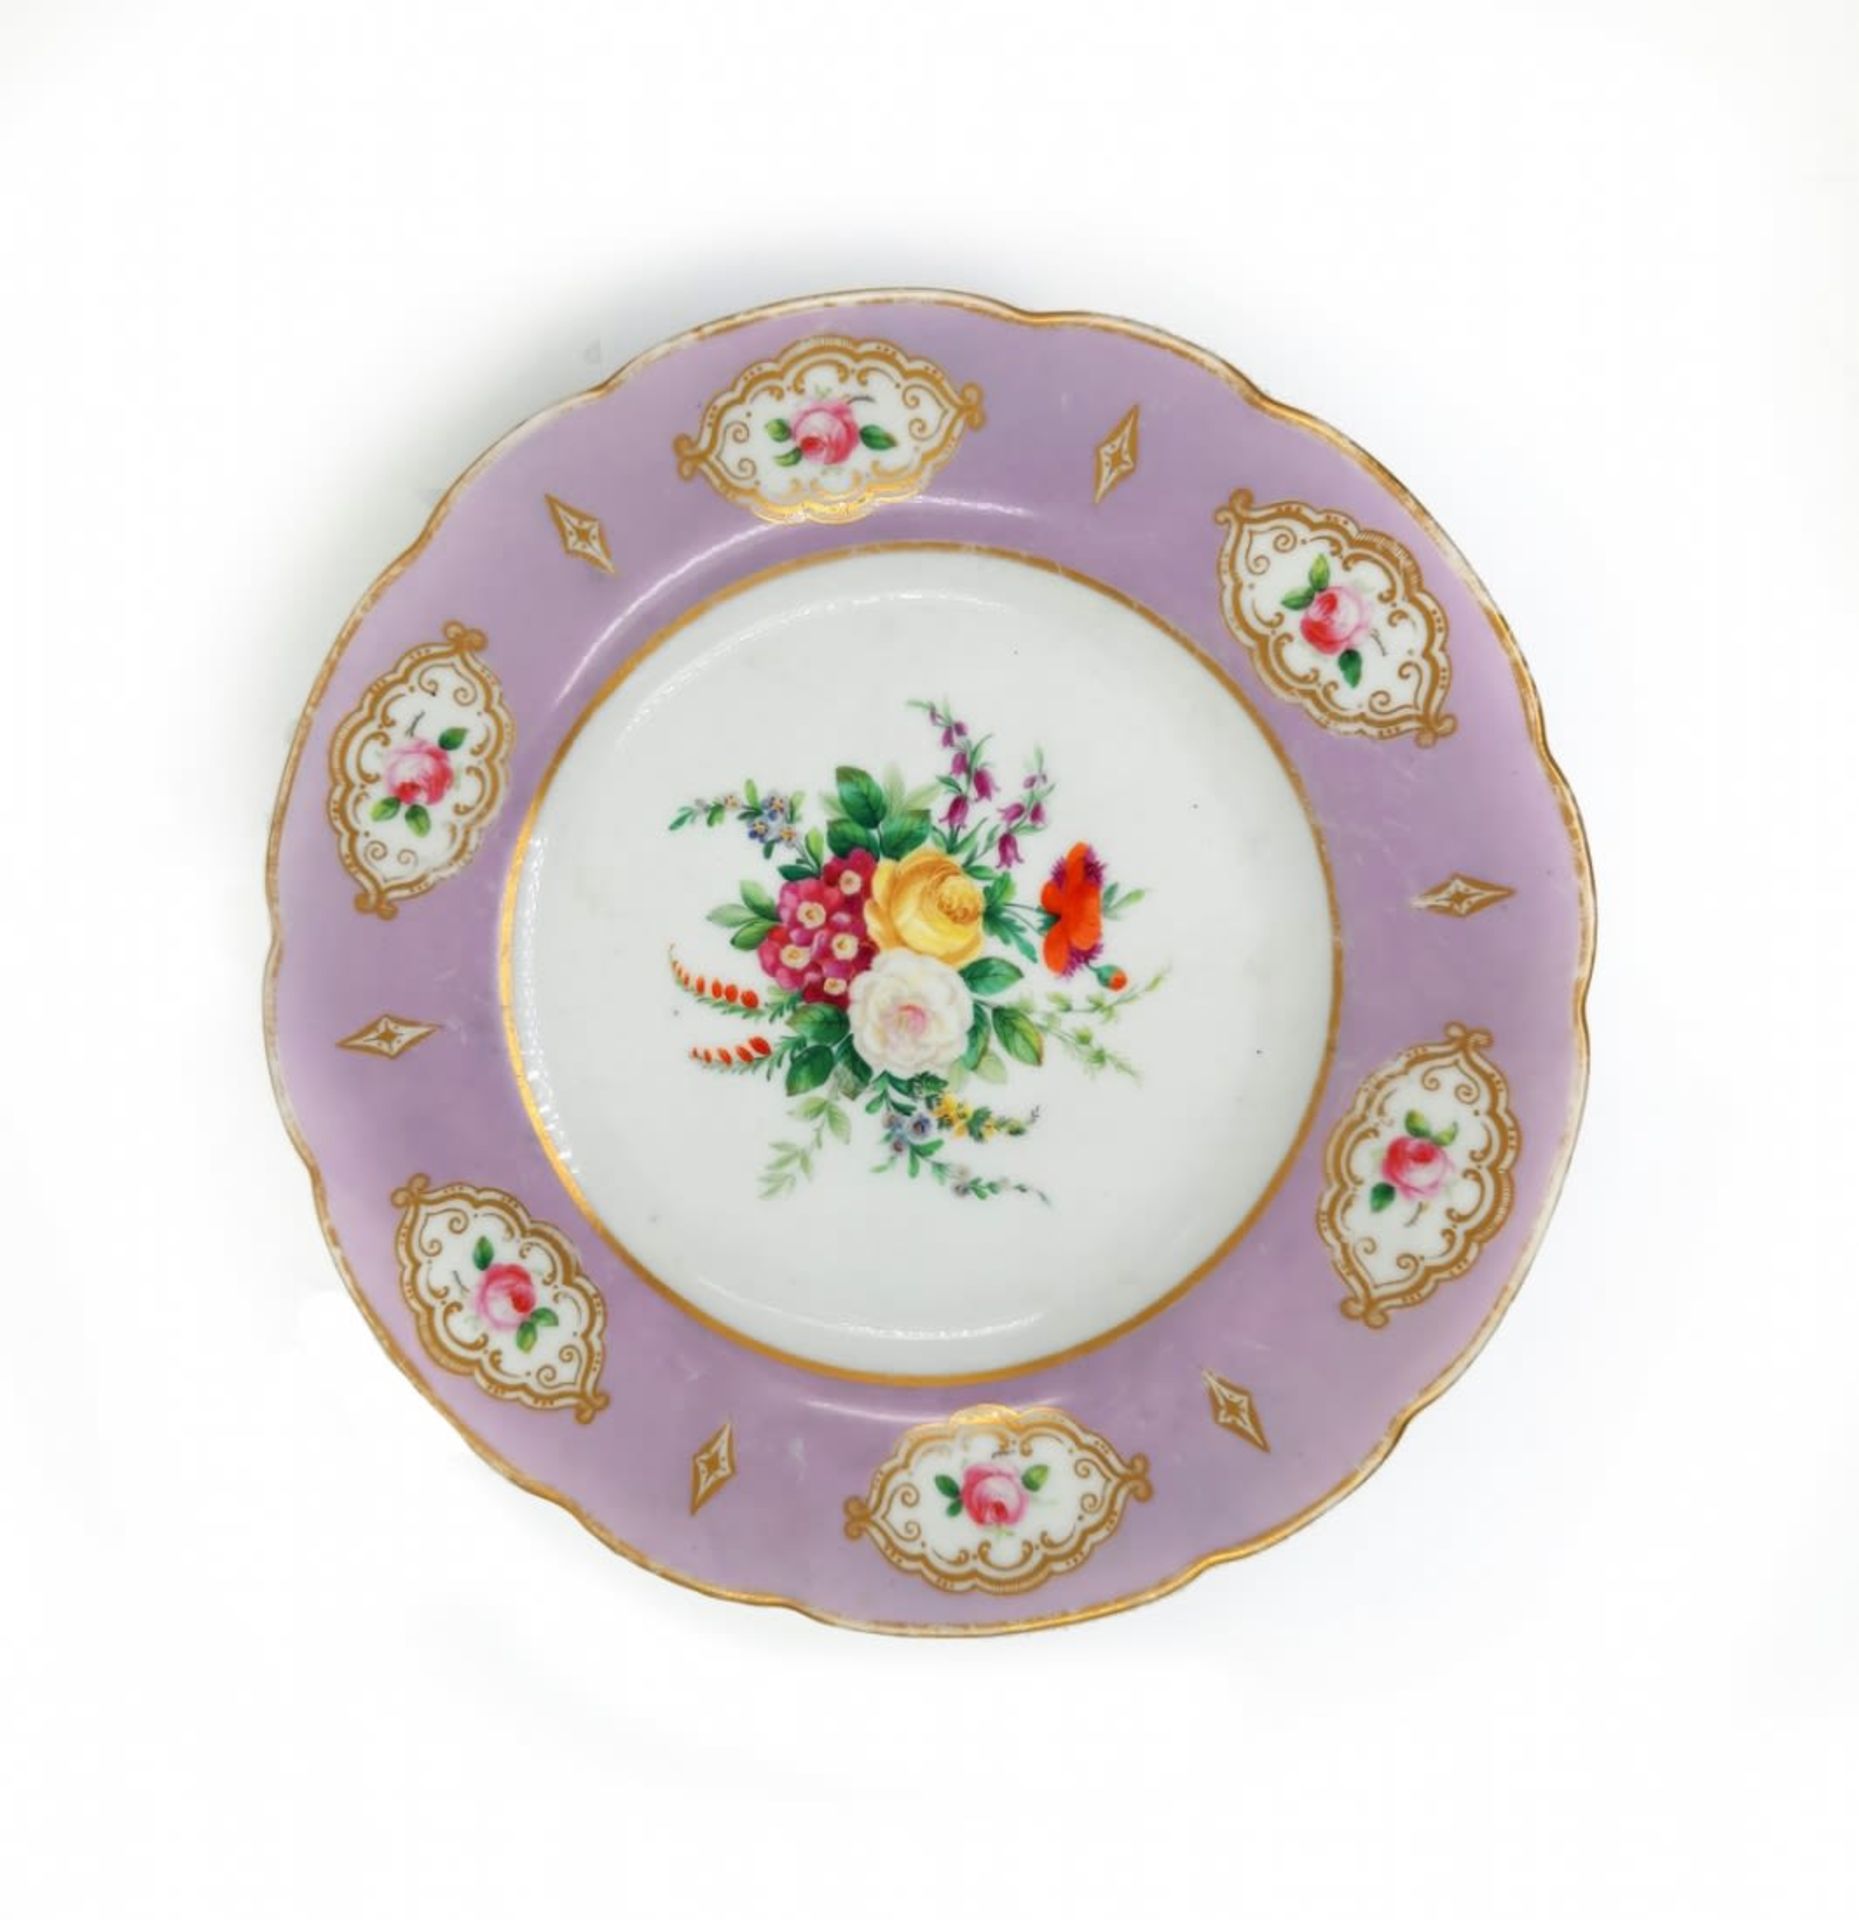 19th Century Old English porcelain taza, from a luxurious porcelain set for serving desserts, - Bild 2 aus 4